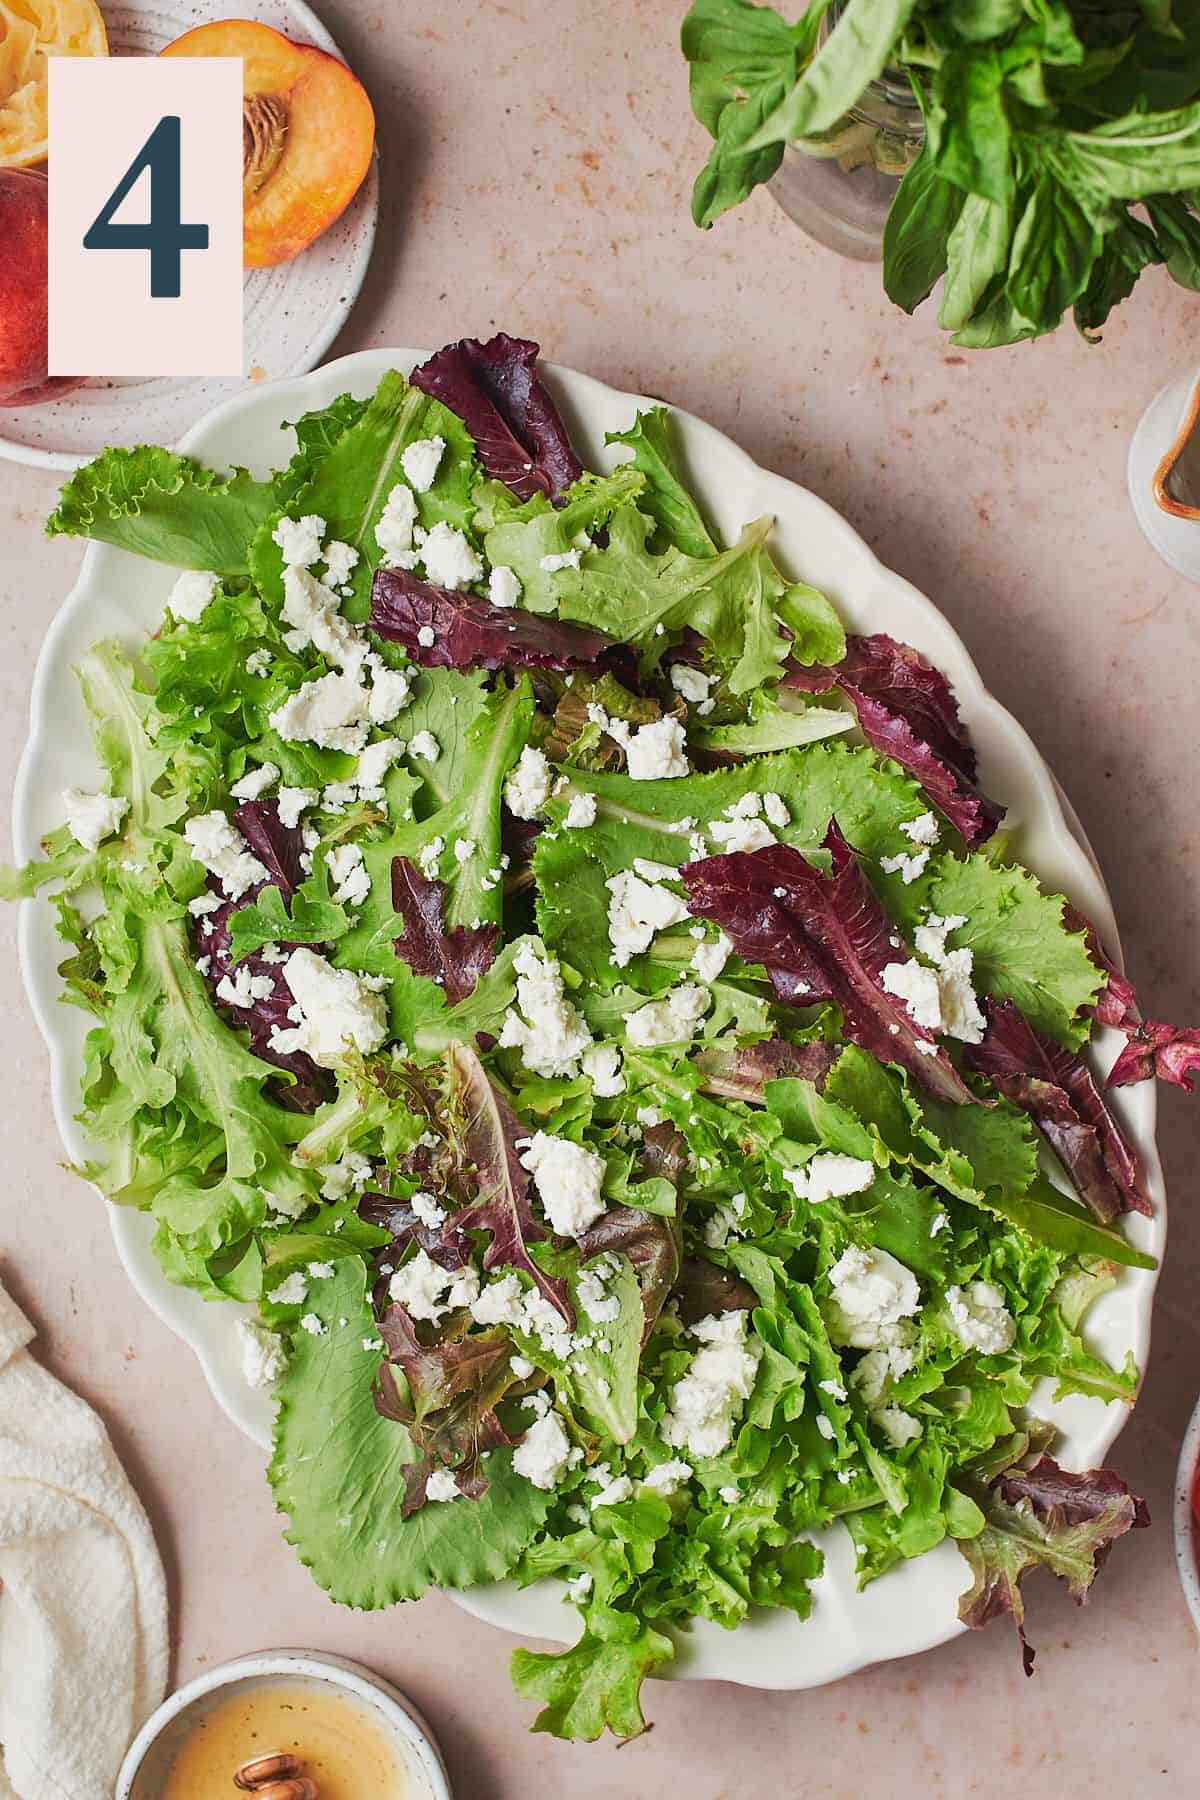 Mixed greens and crumbled feta layered on a scalloped plate.